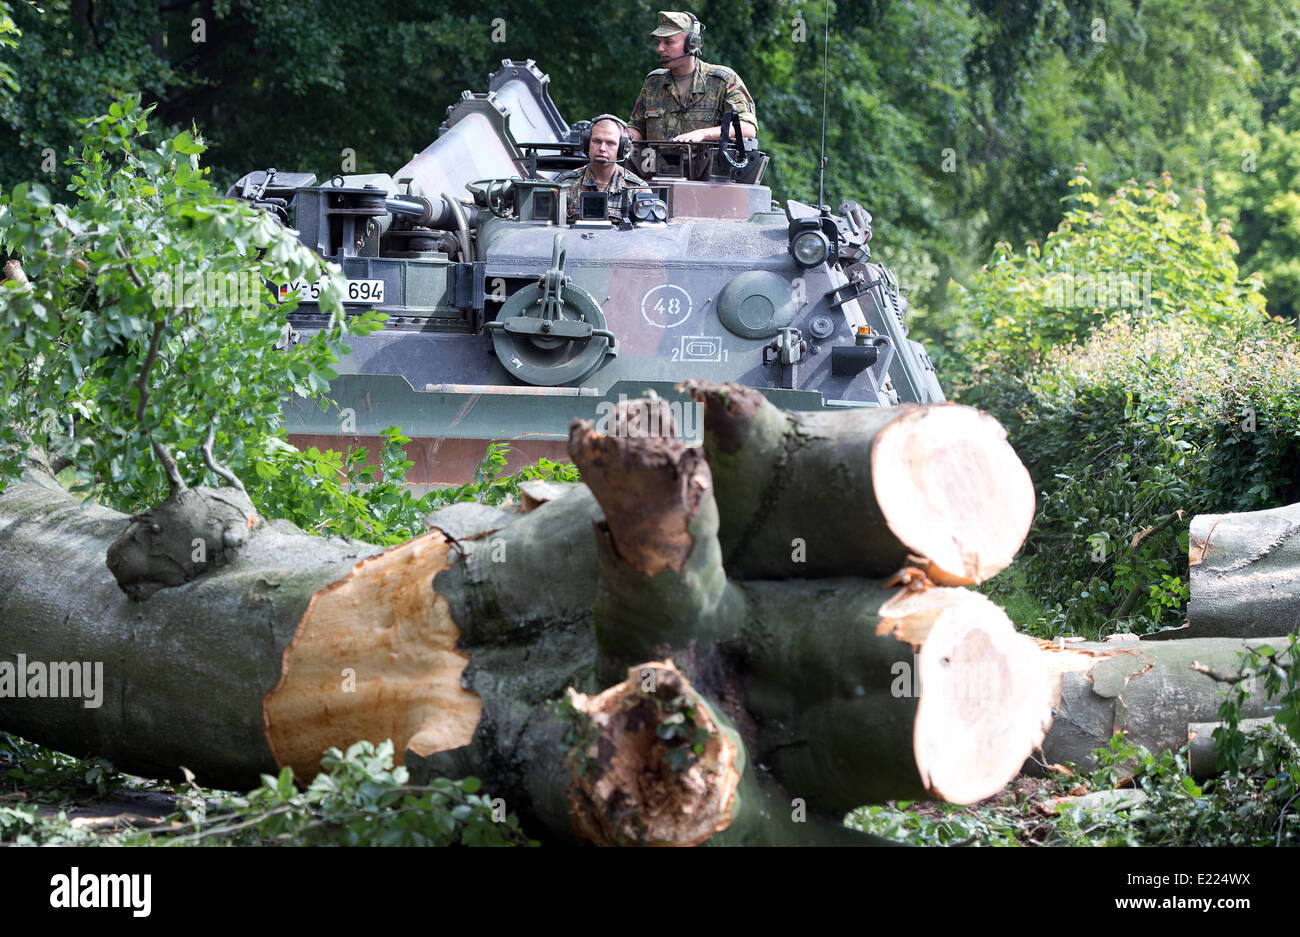 Duesseldorf, Germany. 13th June, 2014. The Dachs Military engineering vehicle clears away trees in Duesseldorf, Germany, 13 June 2014. About 300 soldiers of the German Armed Forces deployed on a clean-up operation with the help of two Armoured Recovery Vehicles among others after thunderstorms in North-Rhine Westphalia. Photo: FEDERICO GAMBARINI/dpa/Alamy Live News Stock Photo